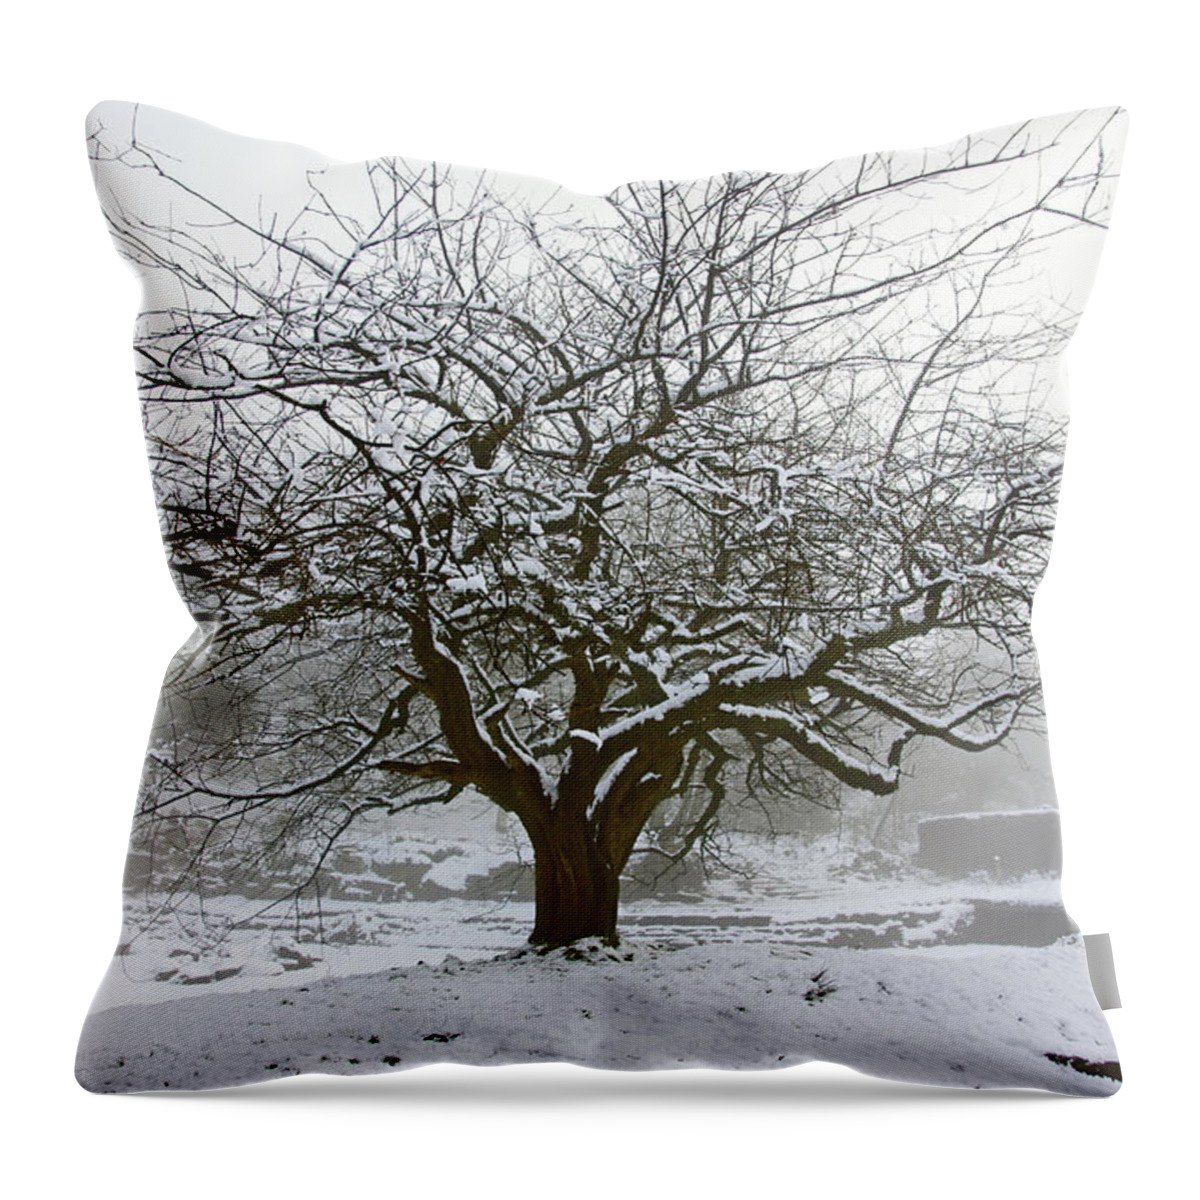 Rivington Throw Pillow featuring the photograph 30/01/19 RIVINGTON. Japanese Pool. Snow Clad Tree. by Lachlan Main